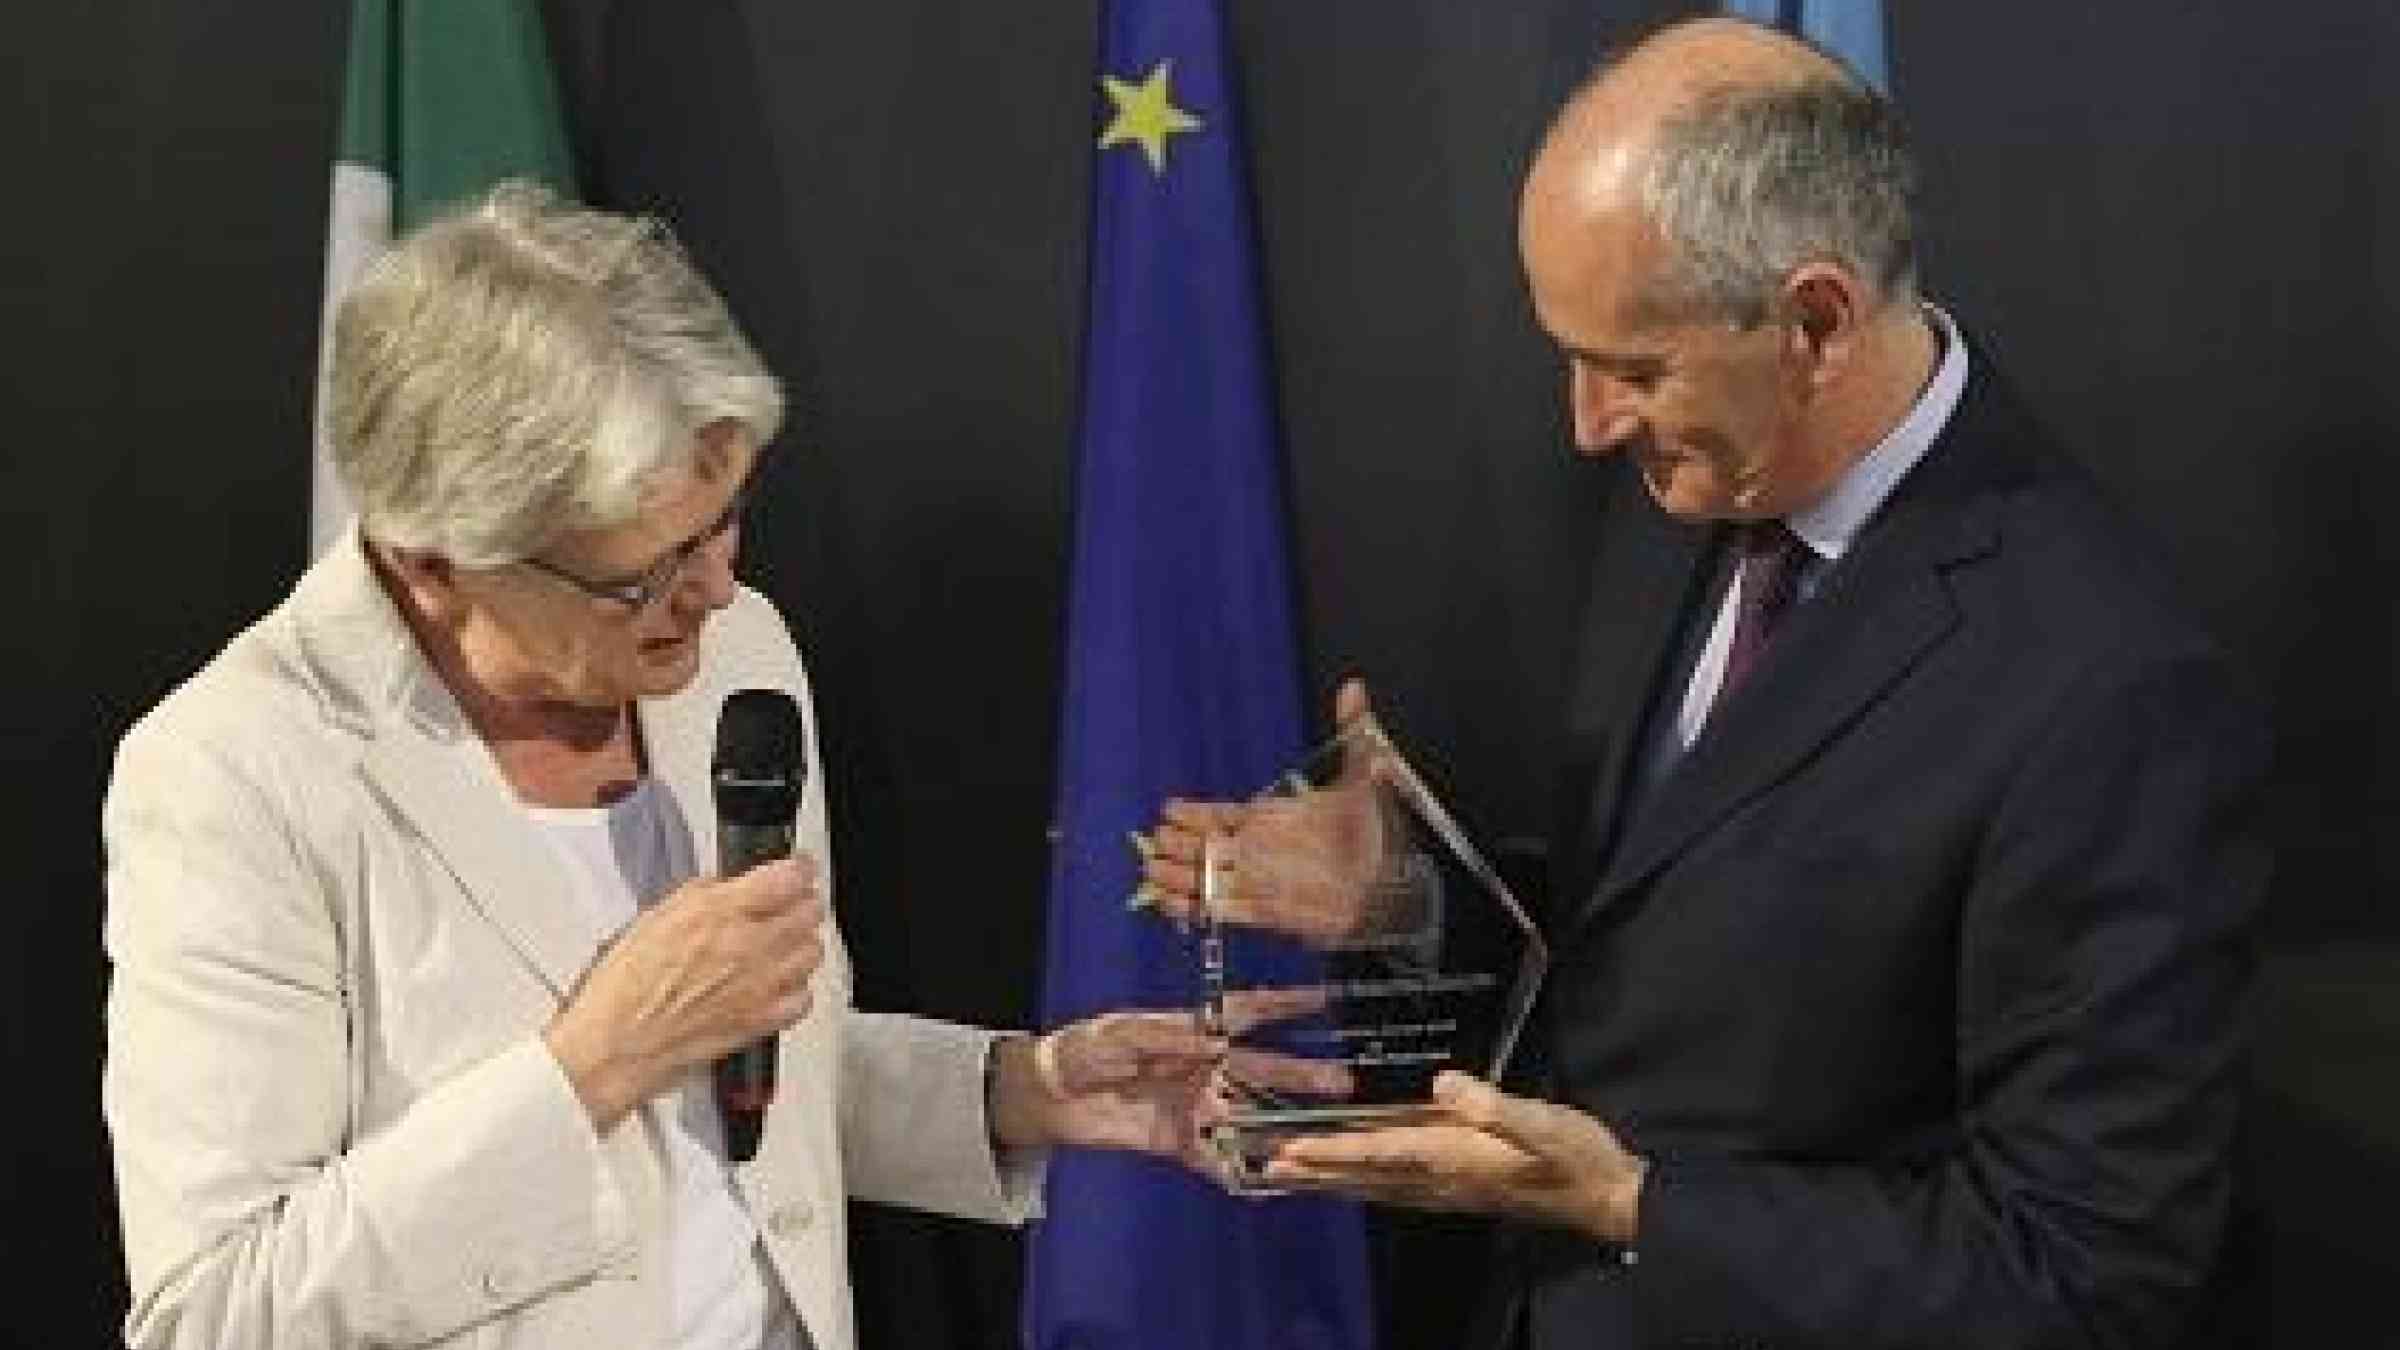 Margareta Wahlström, Special Representative of the UN Secretary-General for Disaster Risk Reduction, presents Franco Gabrielli, Prefect of Rome, with a trophy marking his appointment as a Disaster Risk Reduction Champion at Friday's ceremony in the Italian capital (Photo: Protezione Civile)